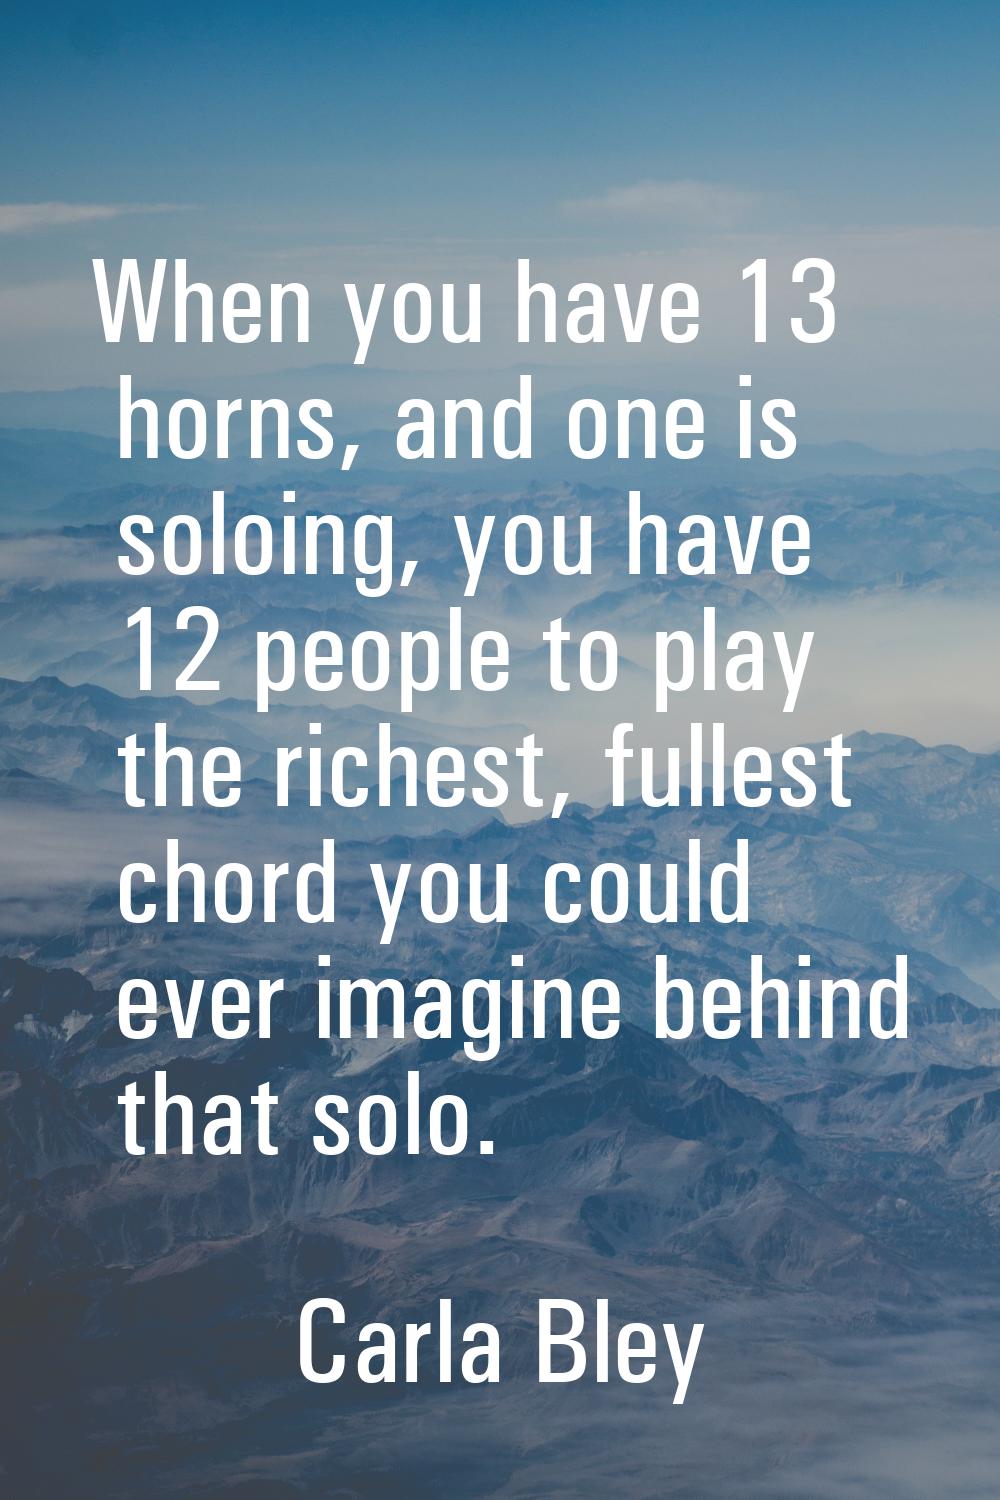 When you have 13 horns, and one is soloing, you have 12 people to play the richest, fullest chord y